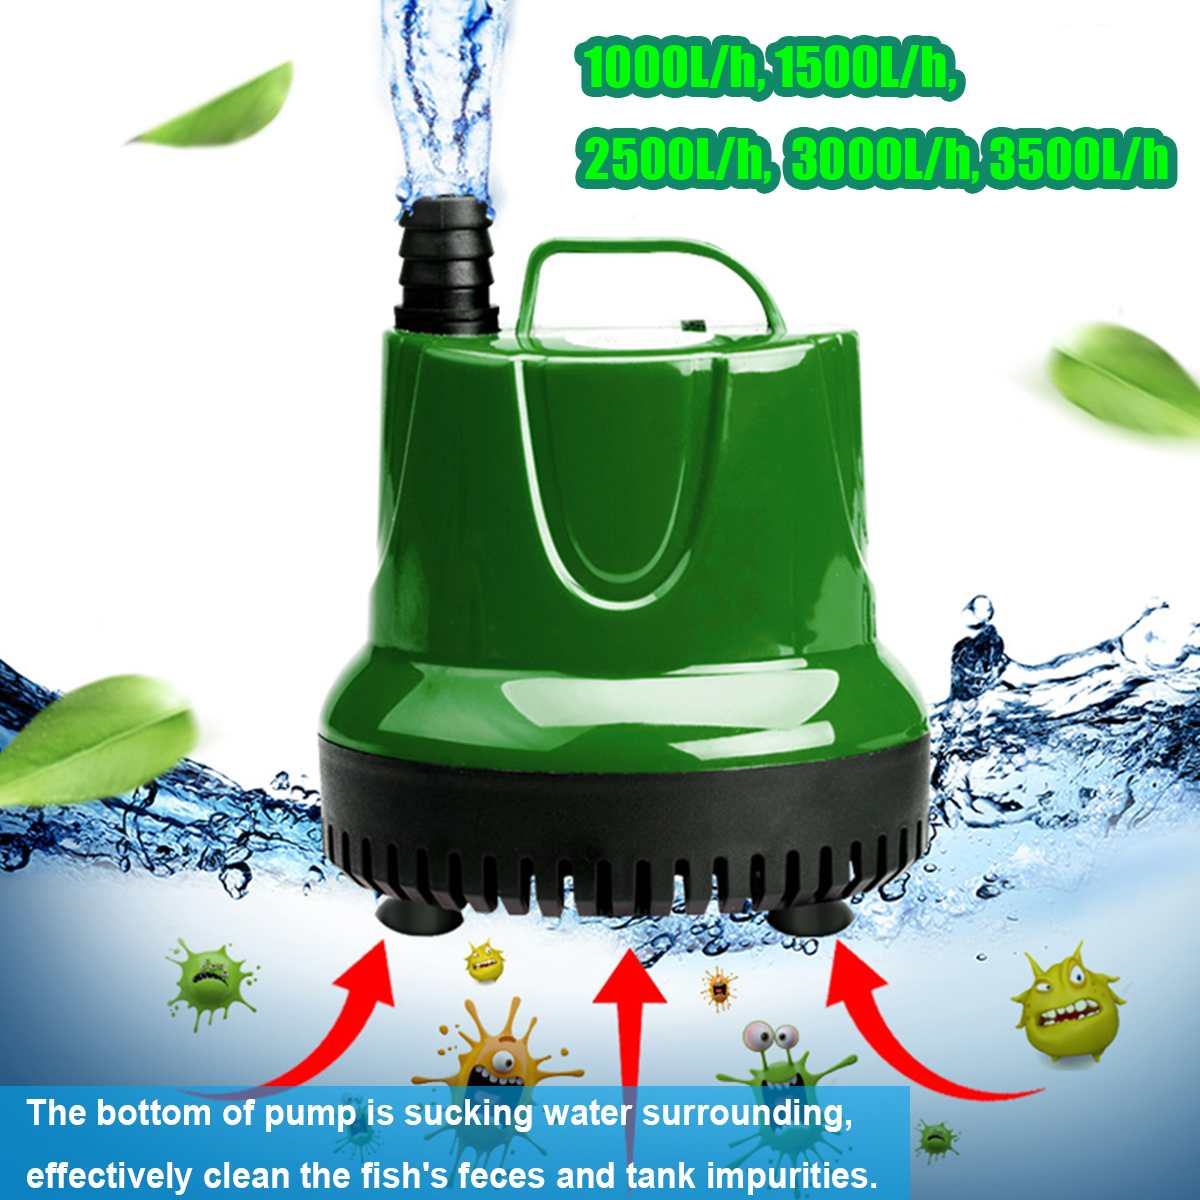 40W, 55W, 80W Water Pump Filter Ultra-Quiet Home Submersible Pump Fish Pond Aquarium Water Fountain Pump Tank FOR Fish Supply